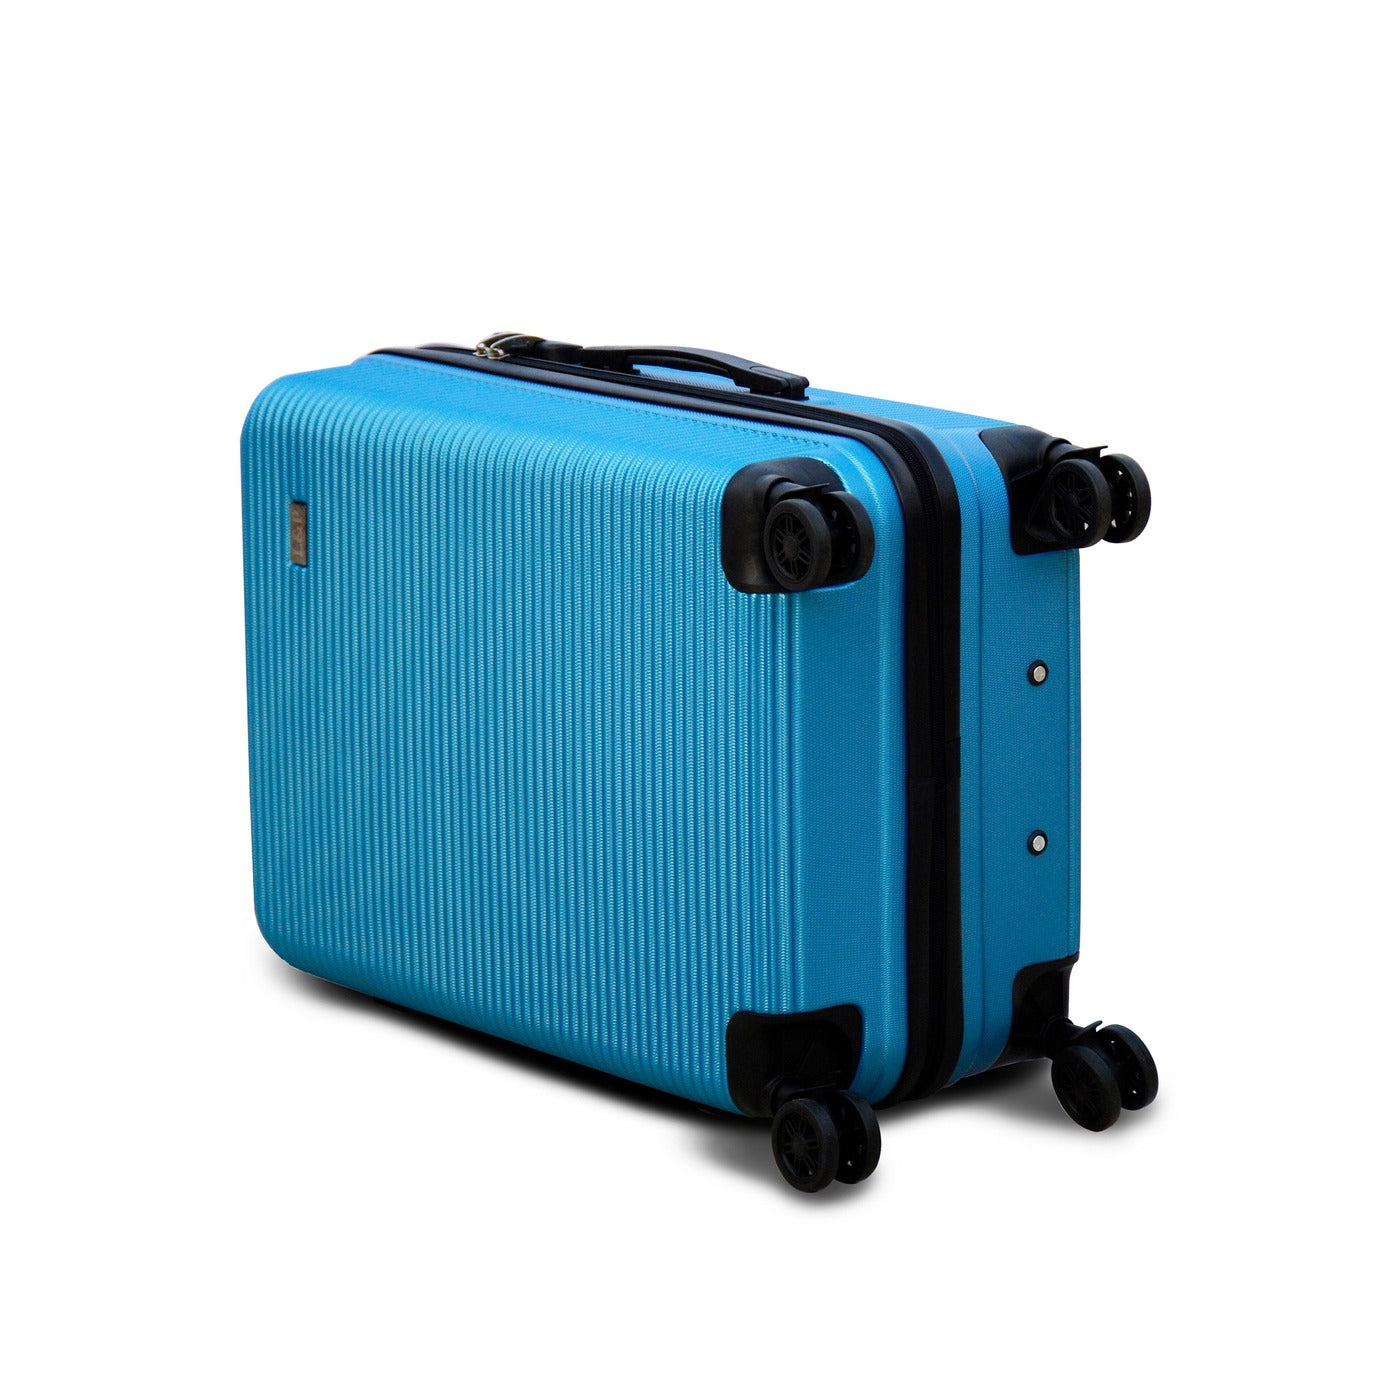 20" Light Blue Colour JIAN ABS Line Luggage Lightweight Hard Case Carry On Trolley Bag With Spinner Wheel